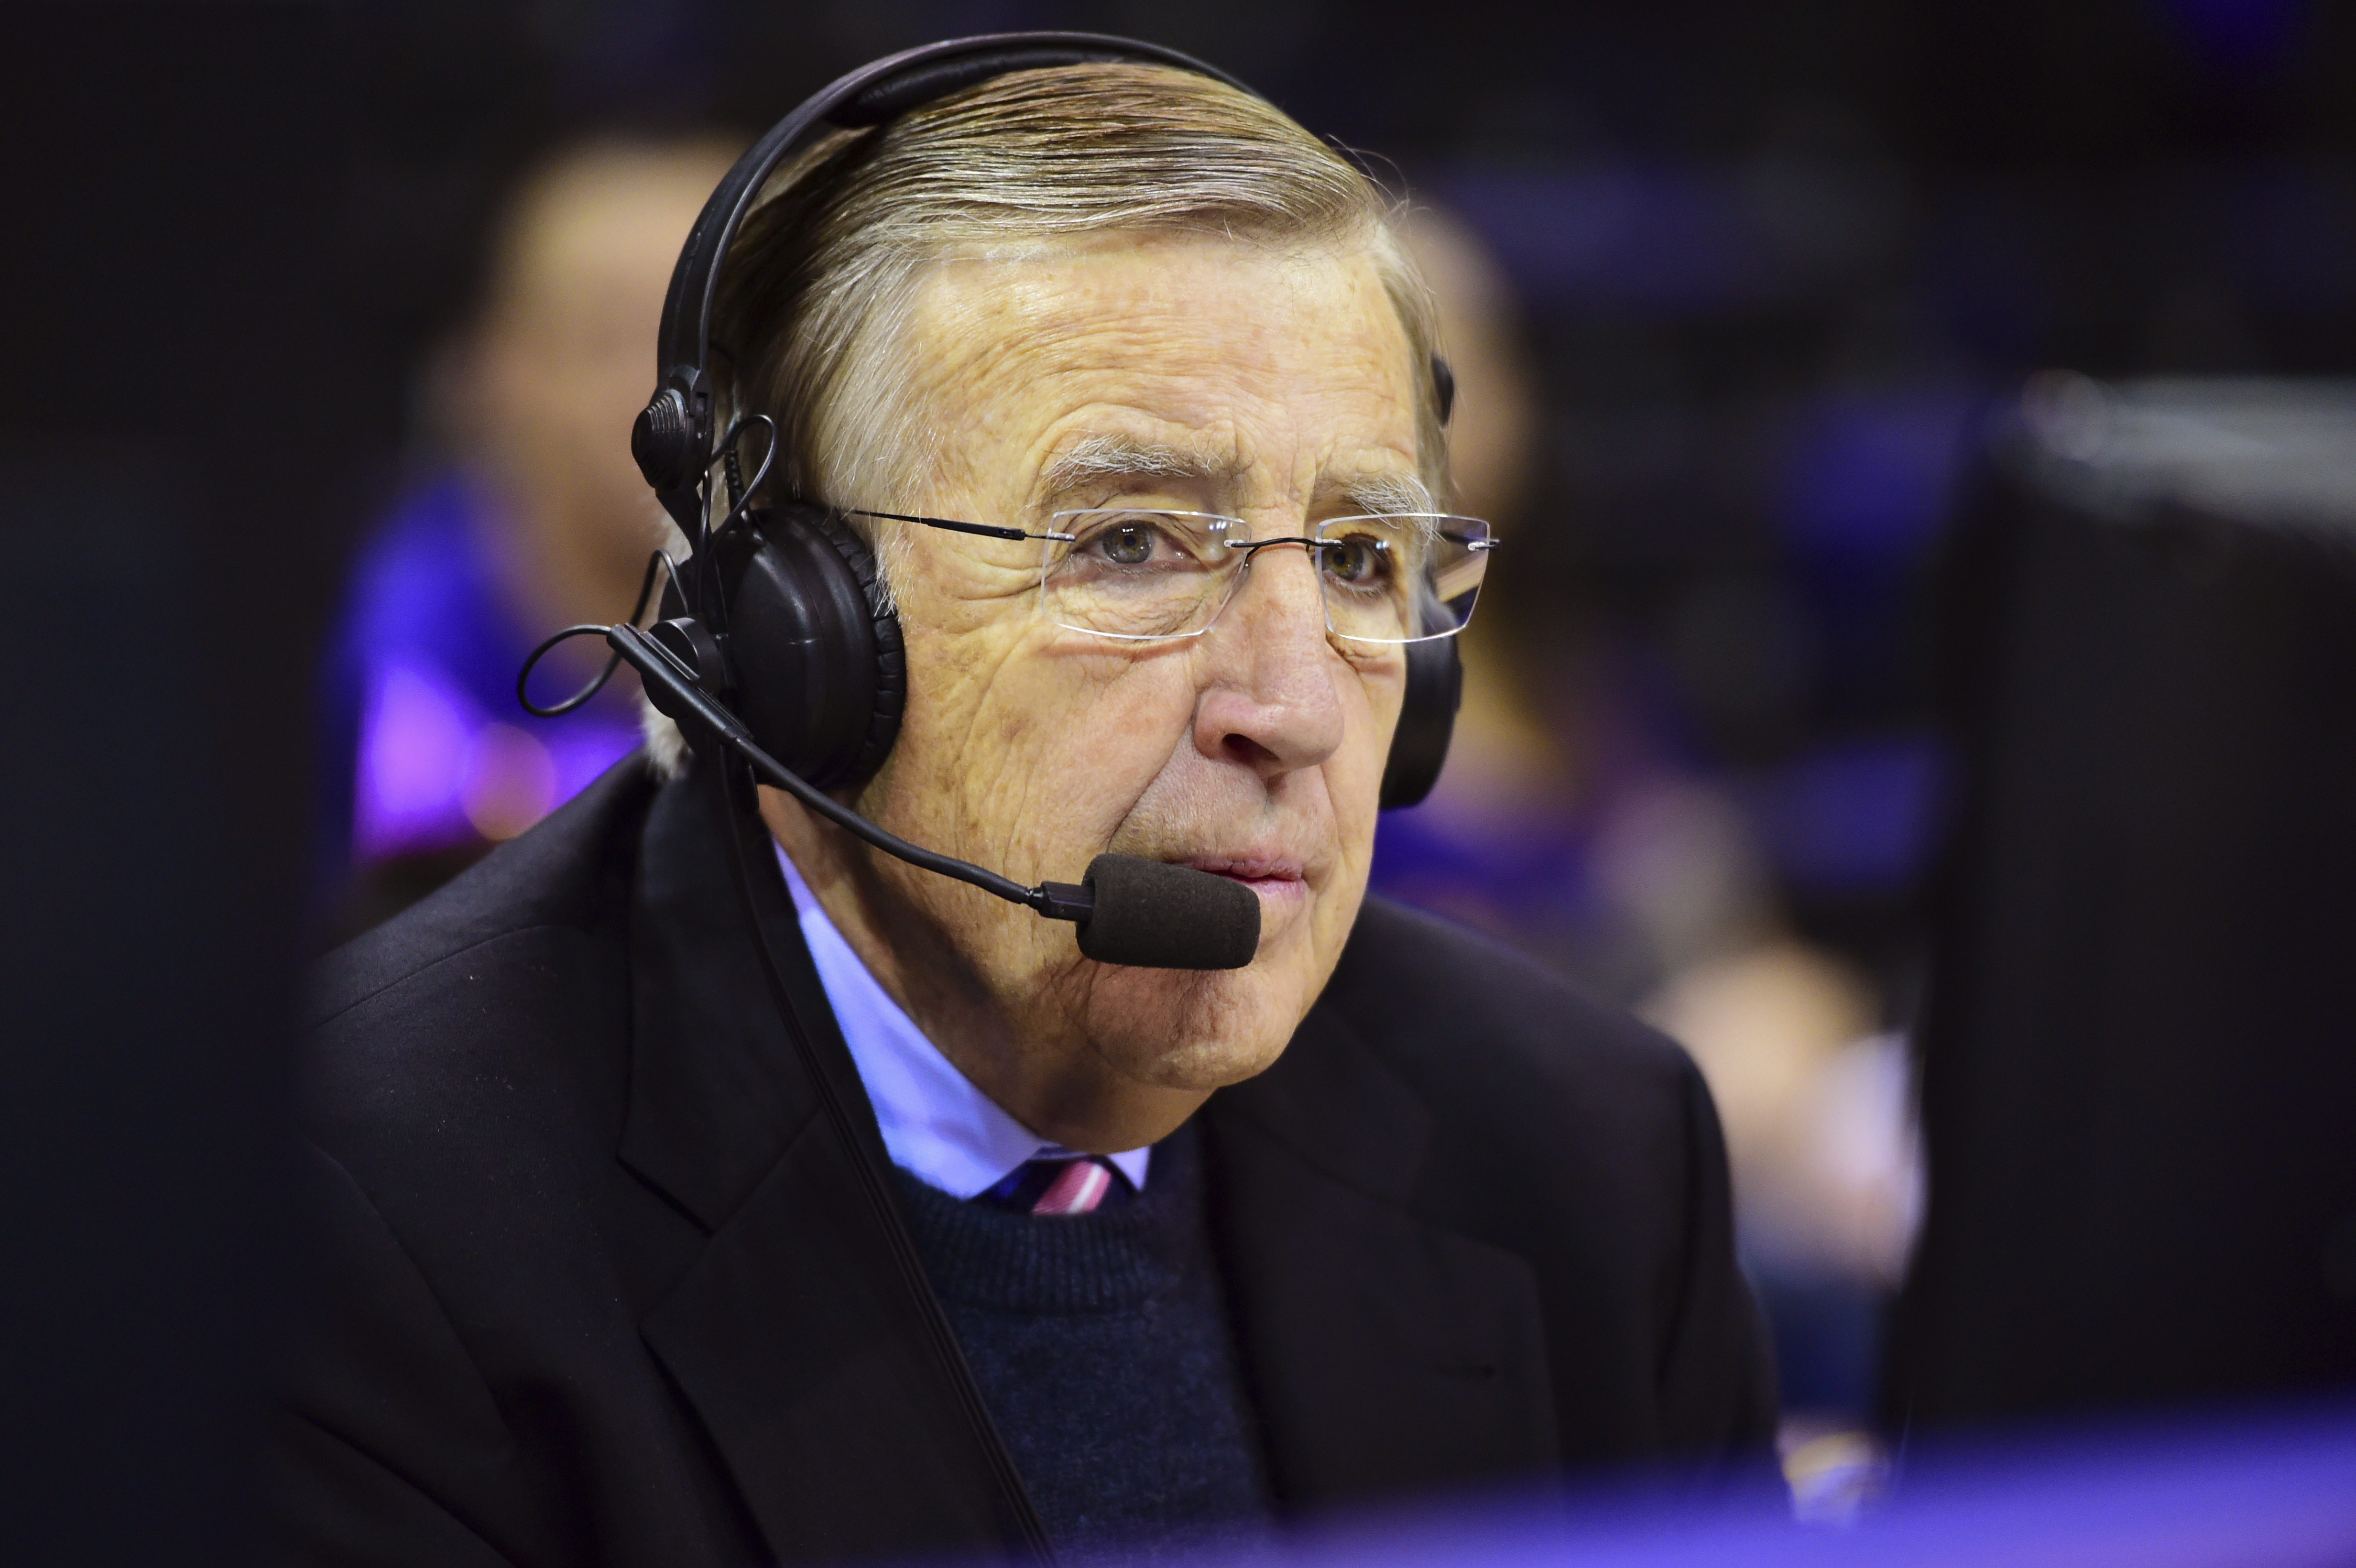 Brent Musburger Is Retiring From Sportscasting At Age 77 The Blade